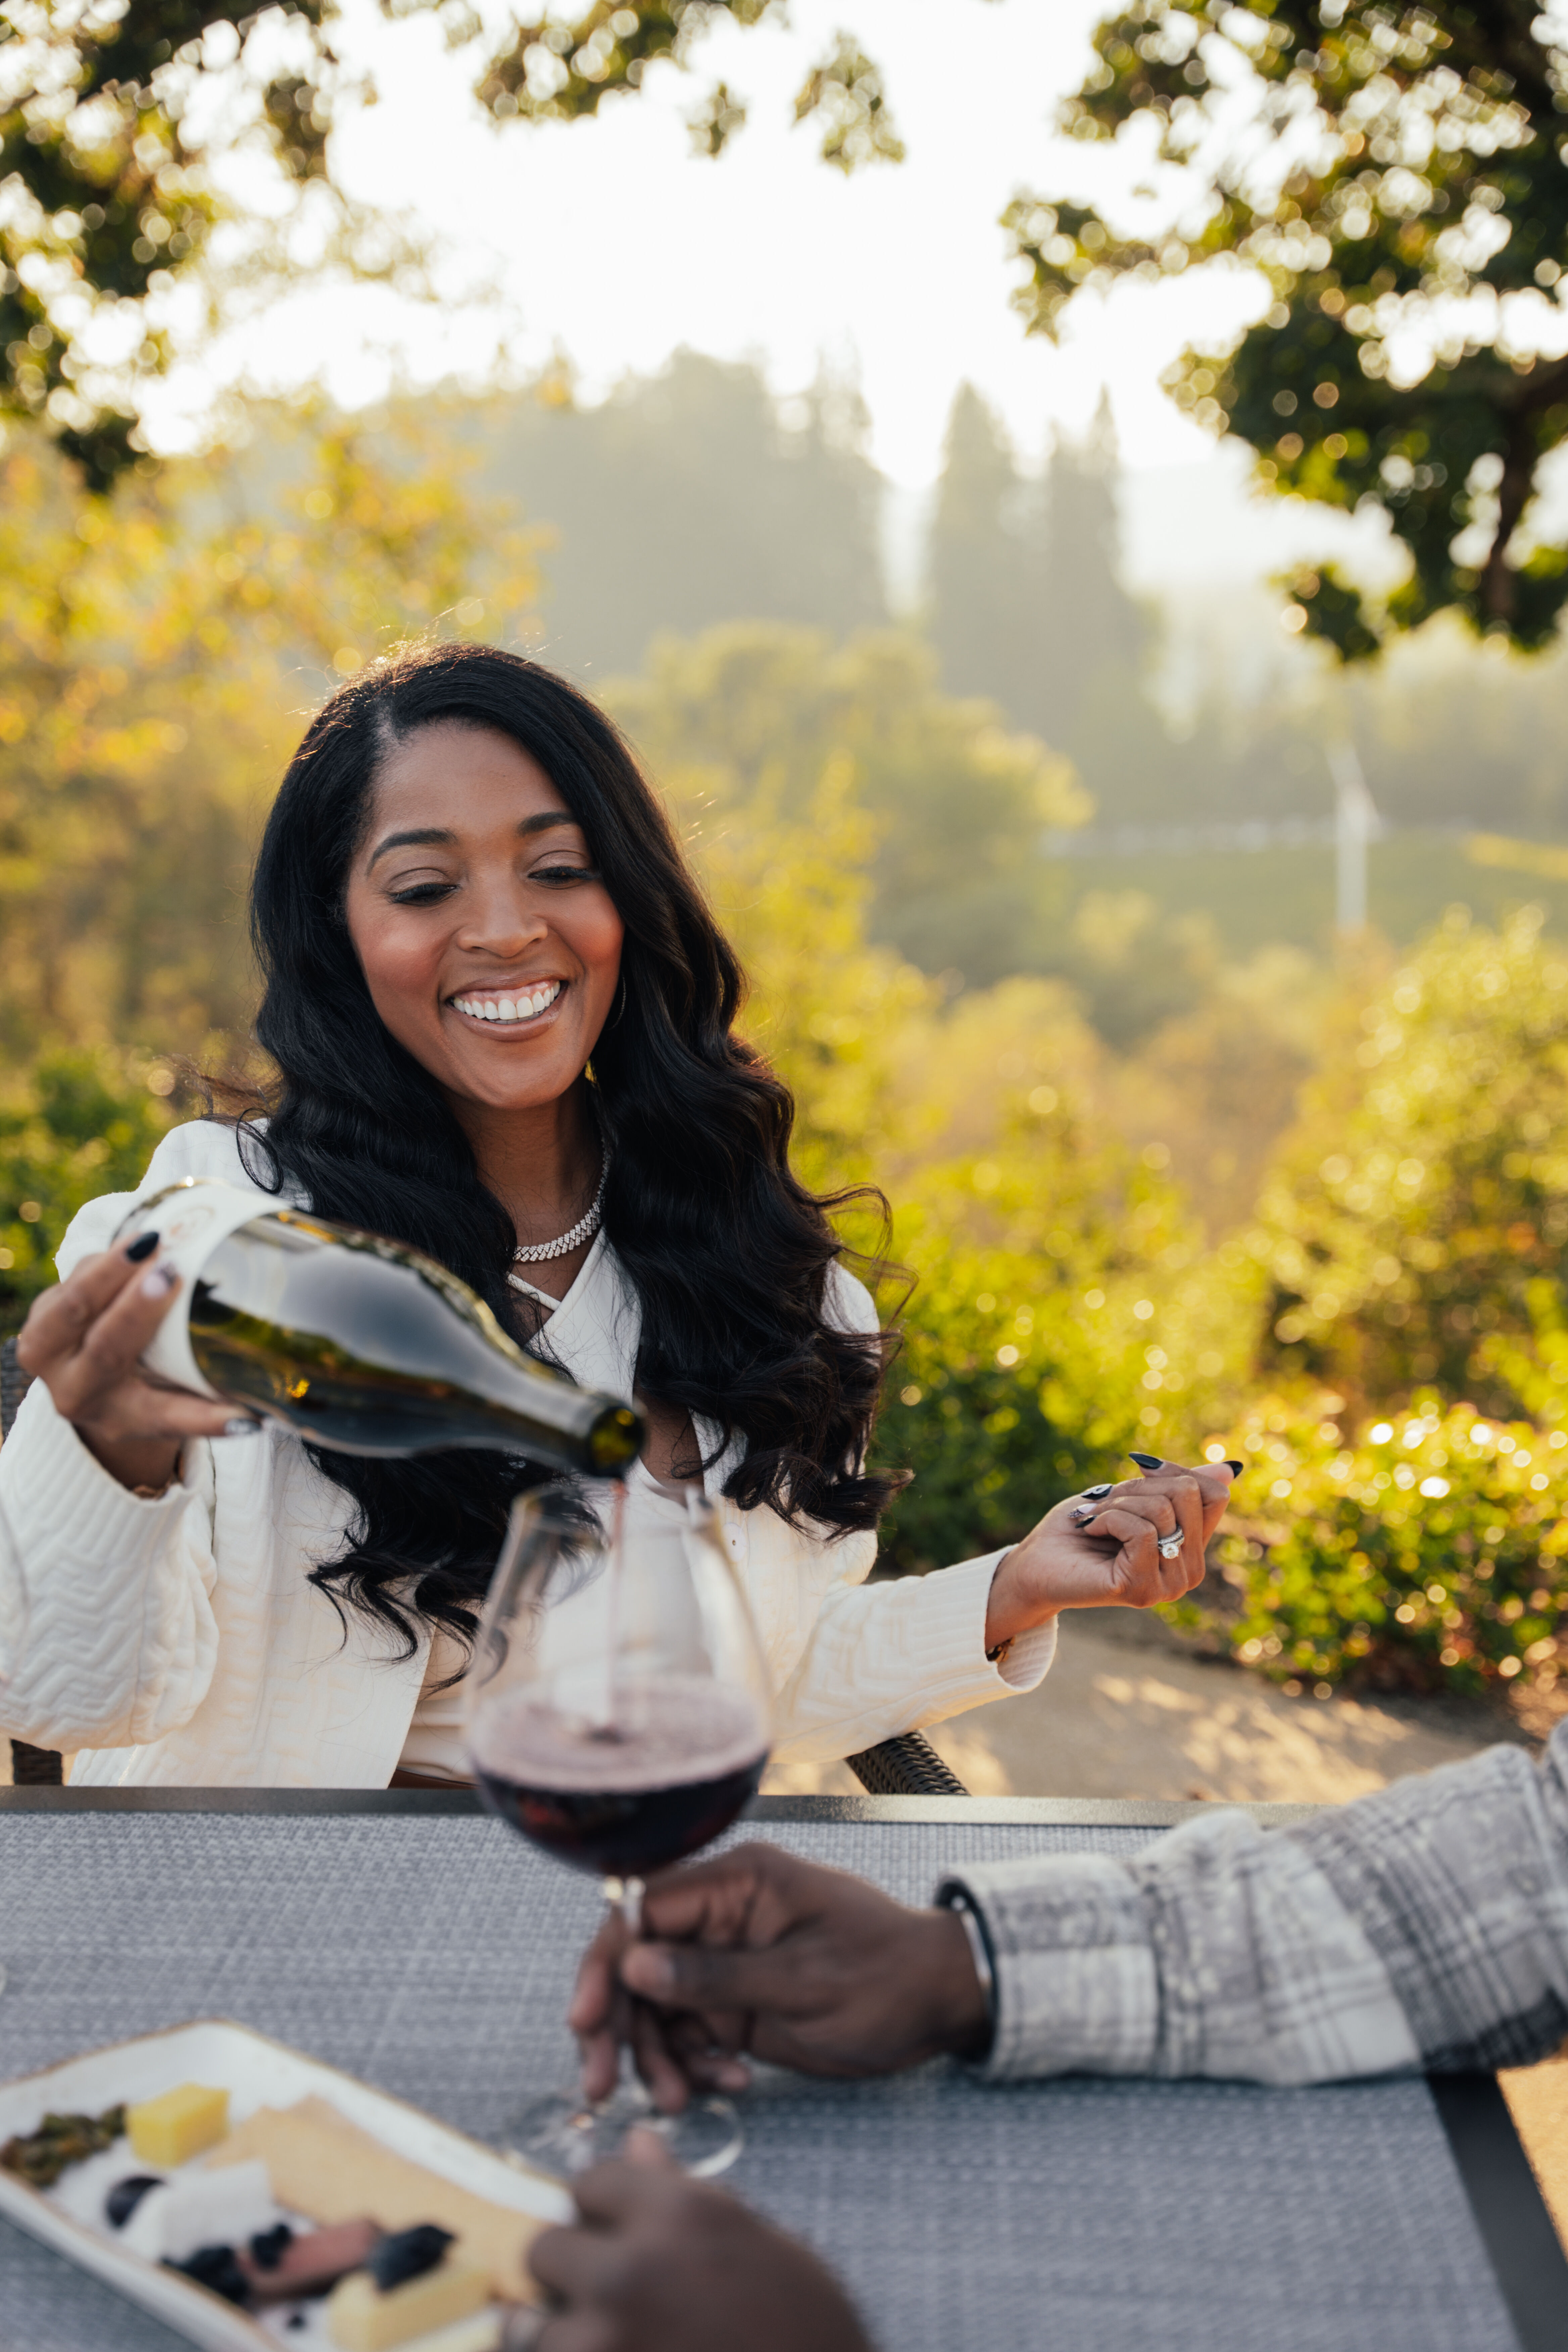 Toya with a glass of wine